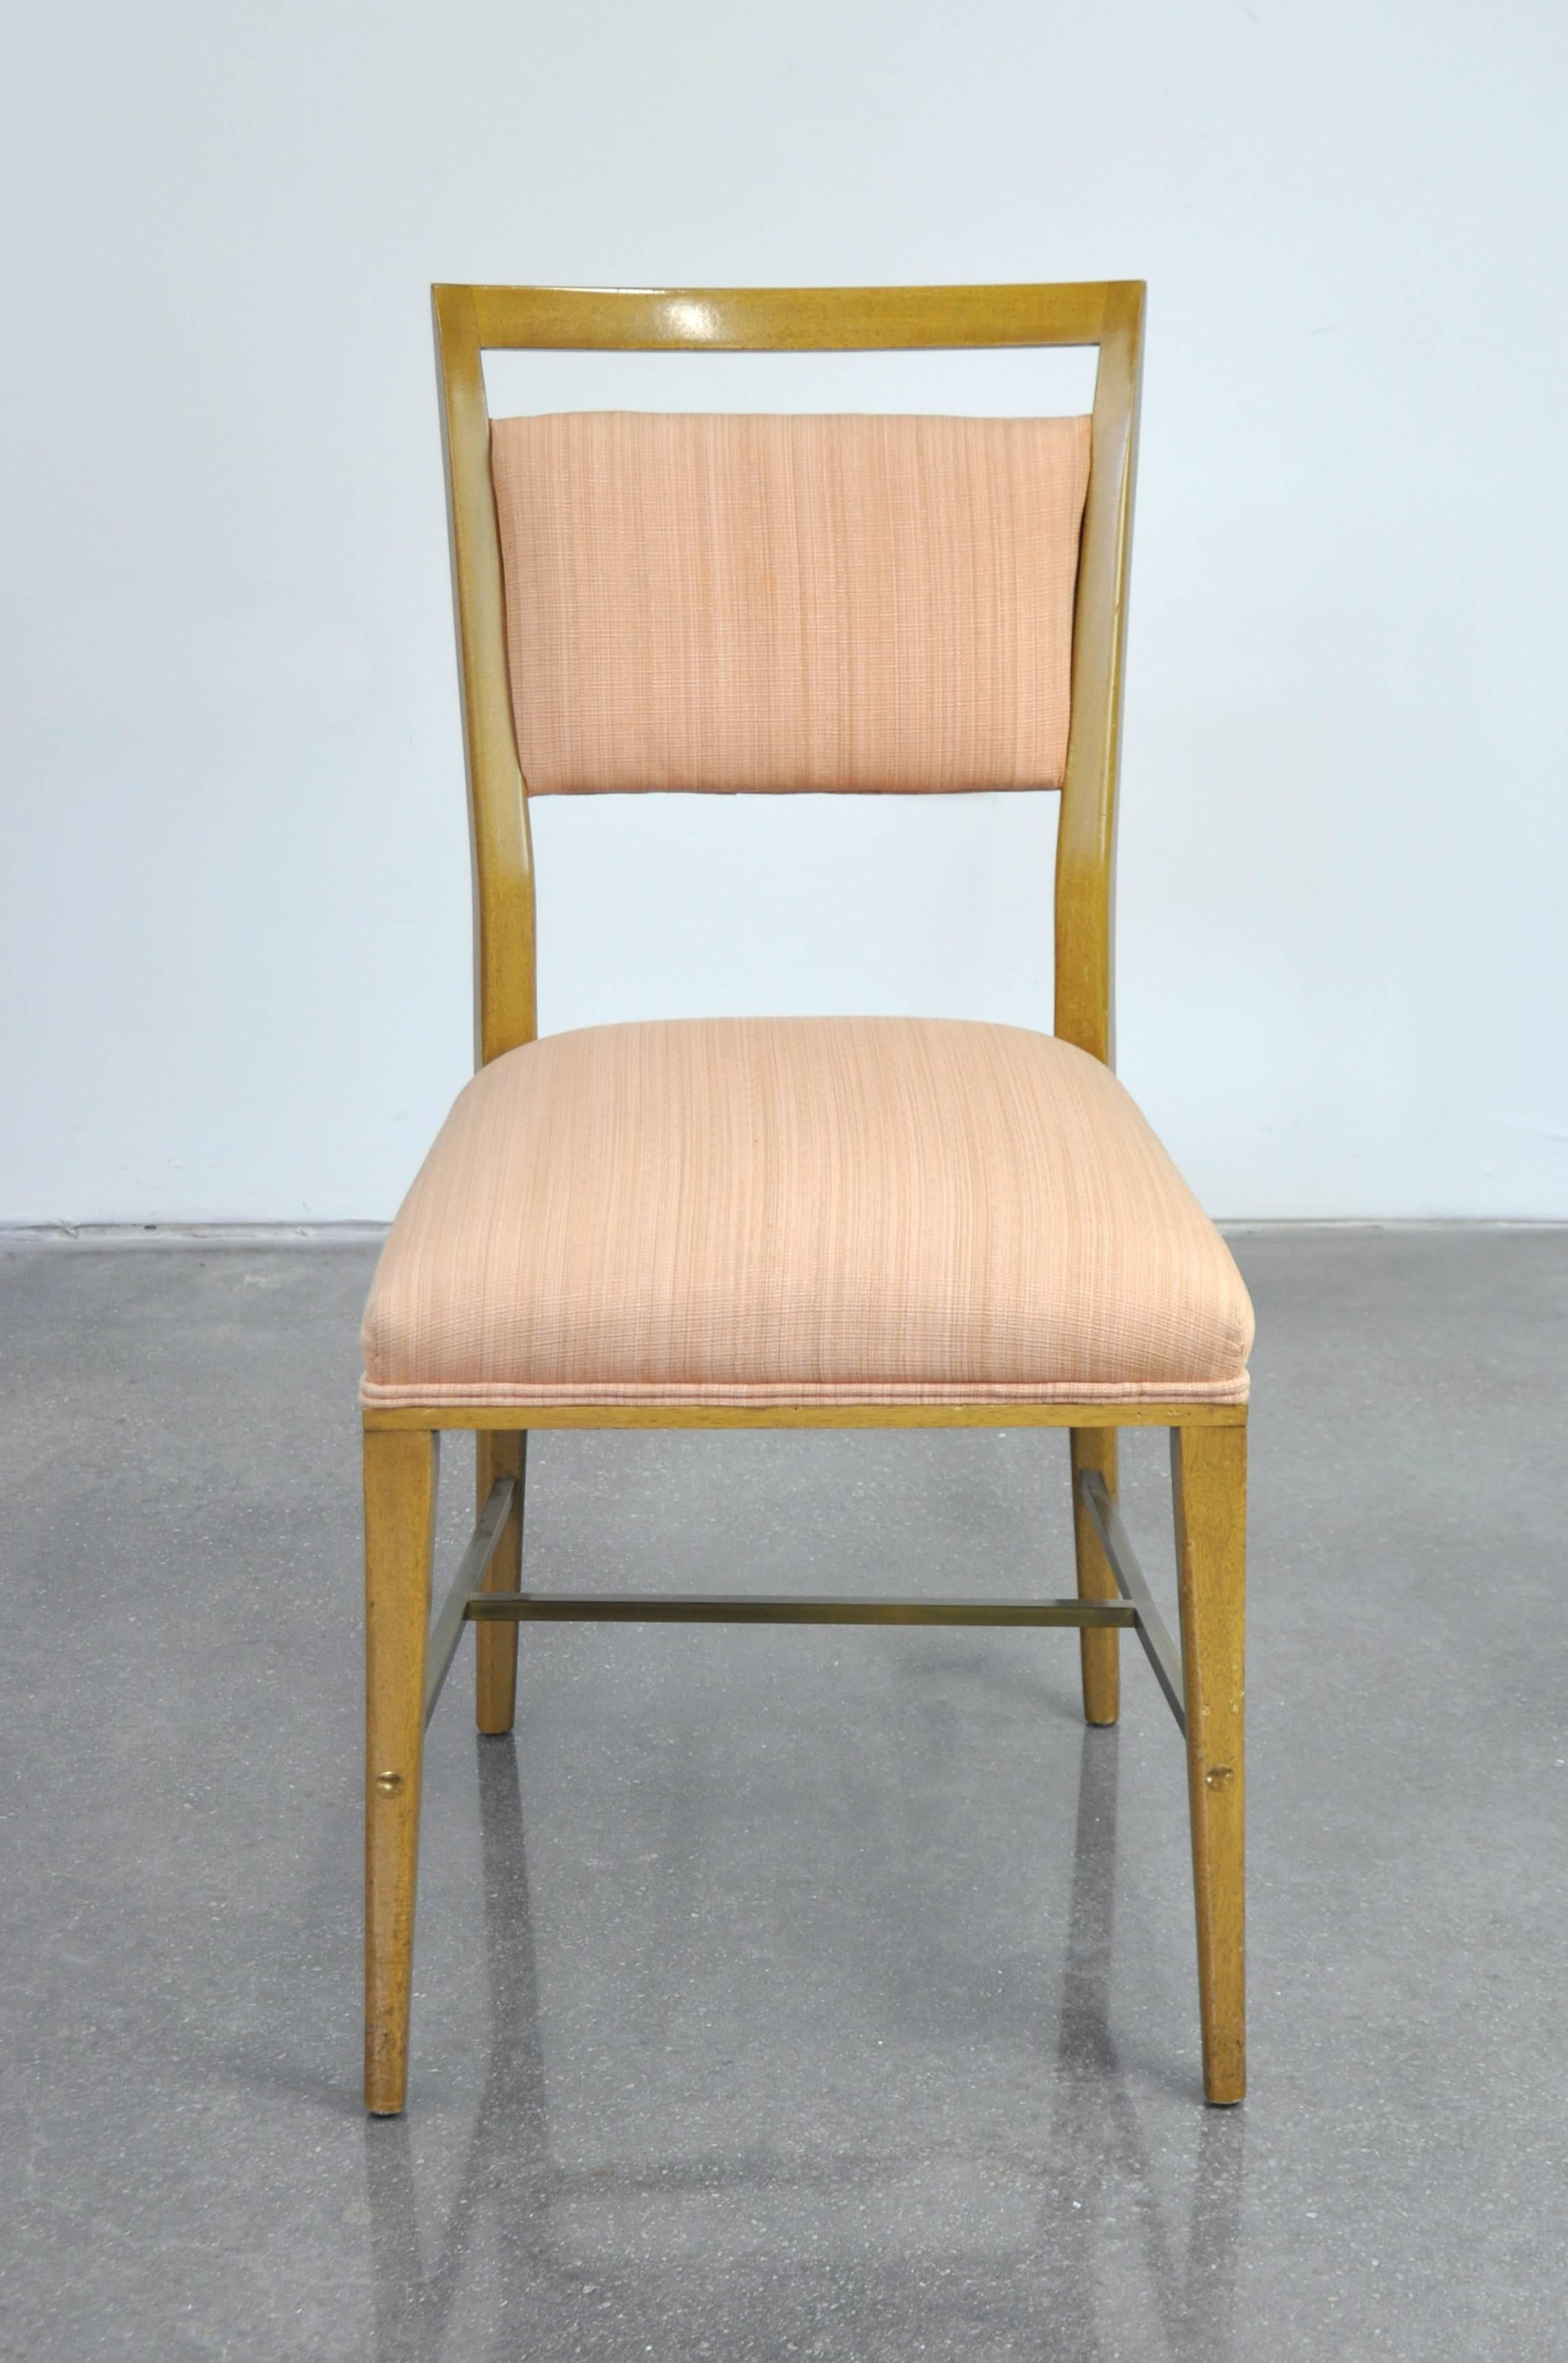 A Mid-Century Modern side chair, designed by Paul McCobb for Directional's Connoisseur collection, and manufactured by H. Sacks and Sons in circa 1953. Can be used for dining or as a desk chair paired with the secretary from the same collection